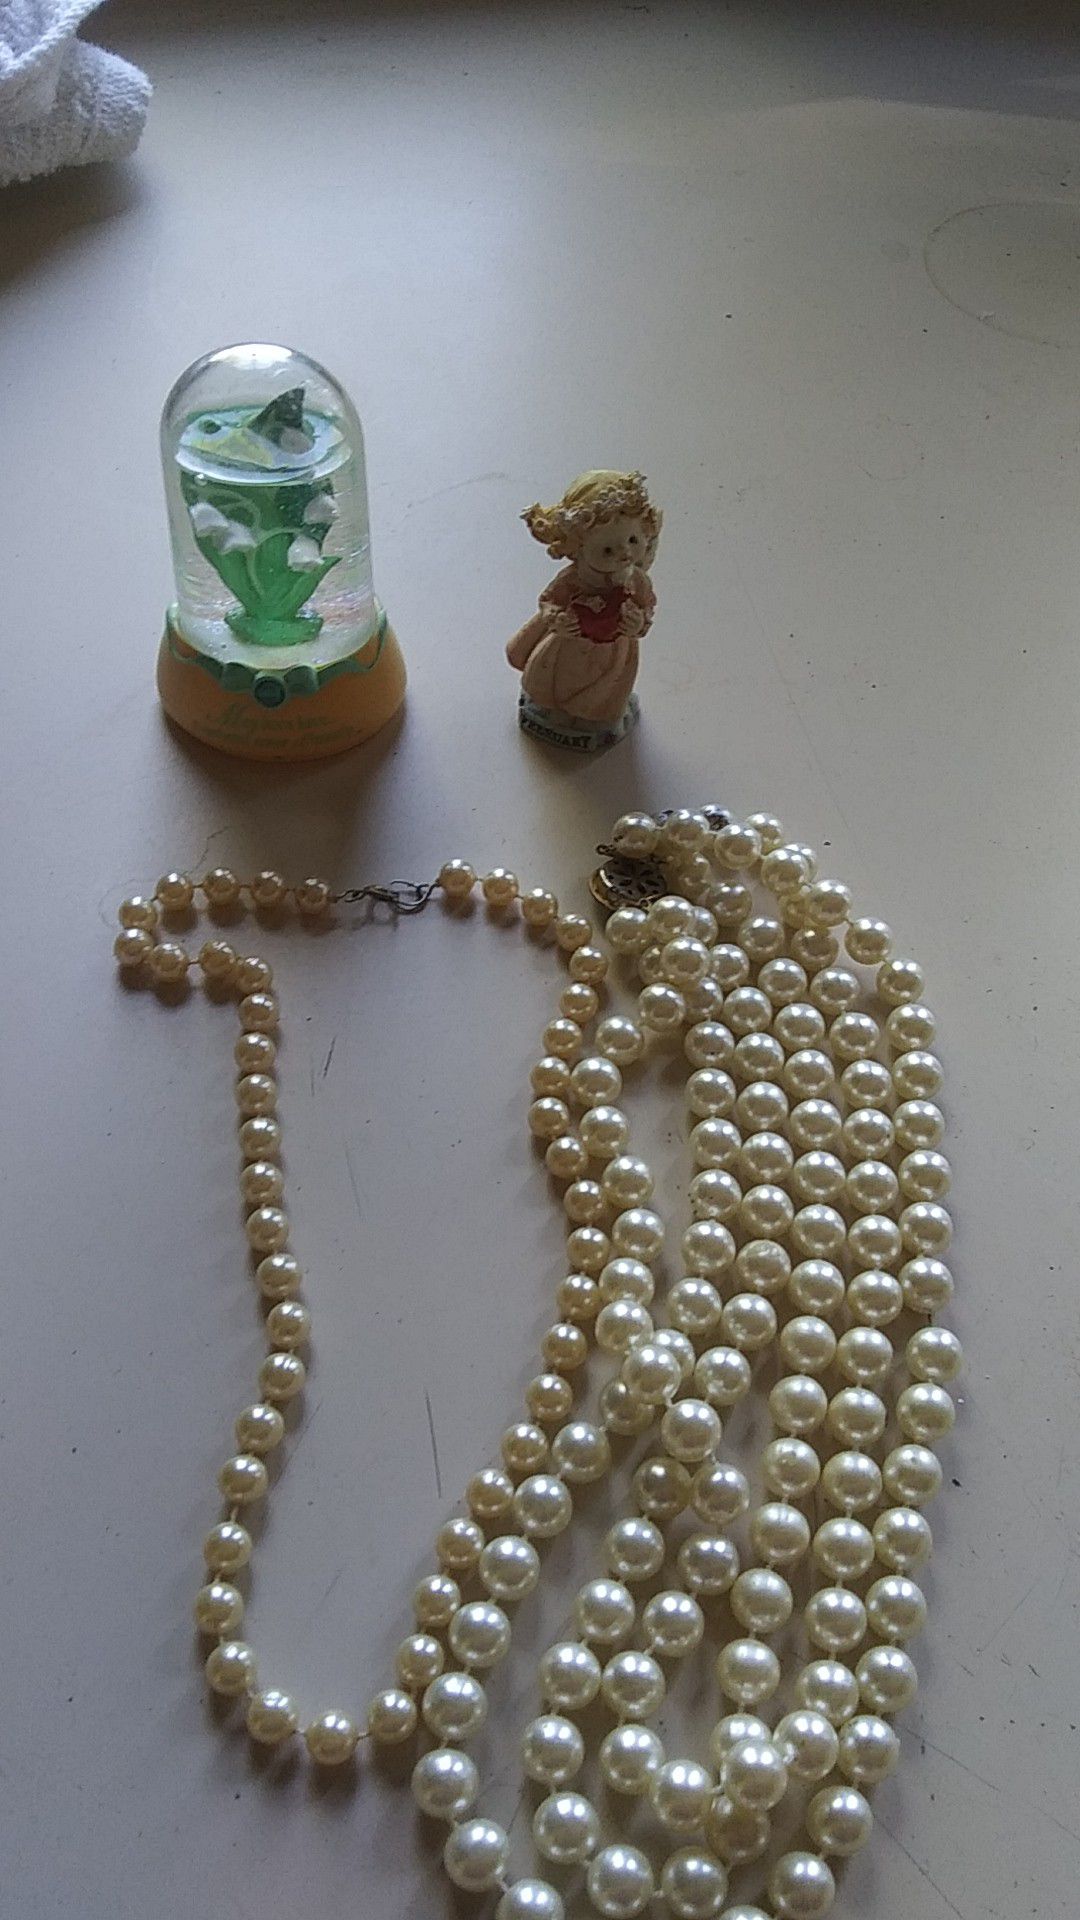 2 pearl necklaces 2 figurines